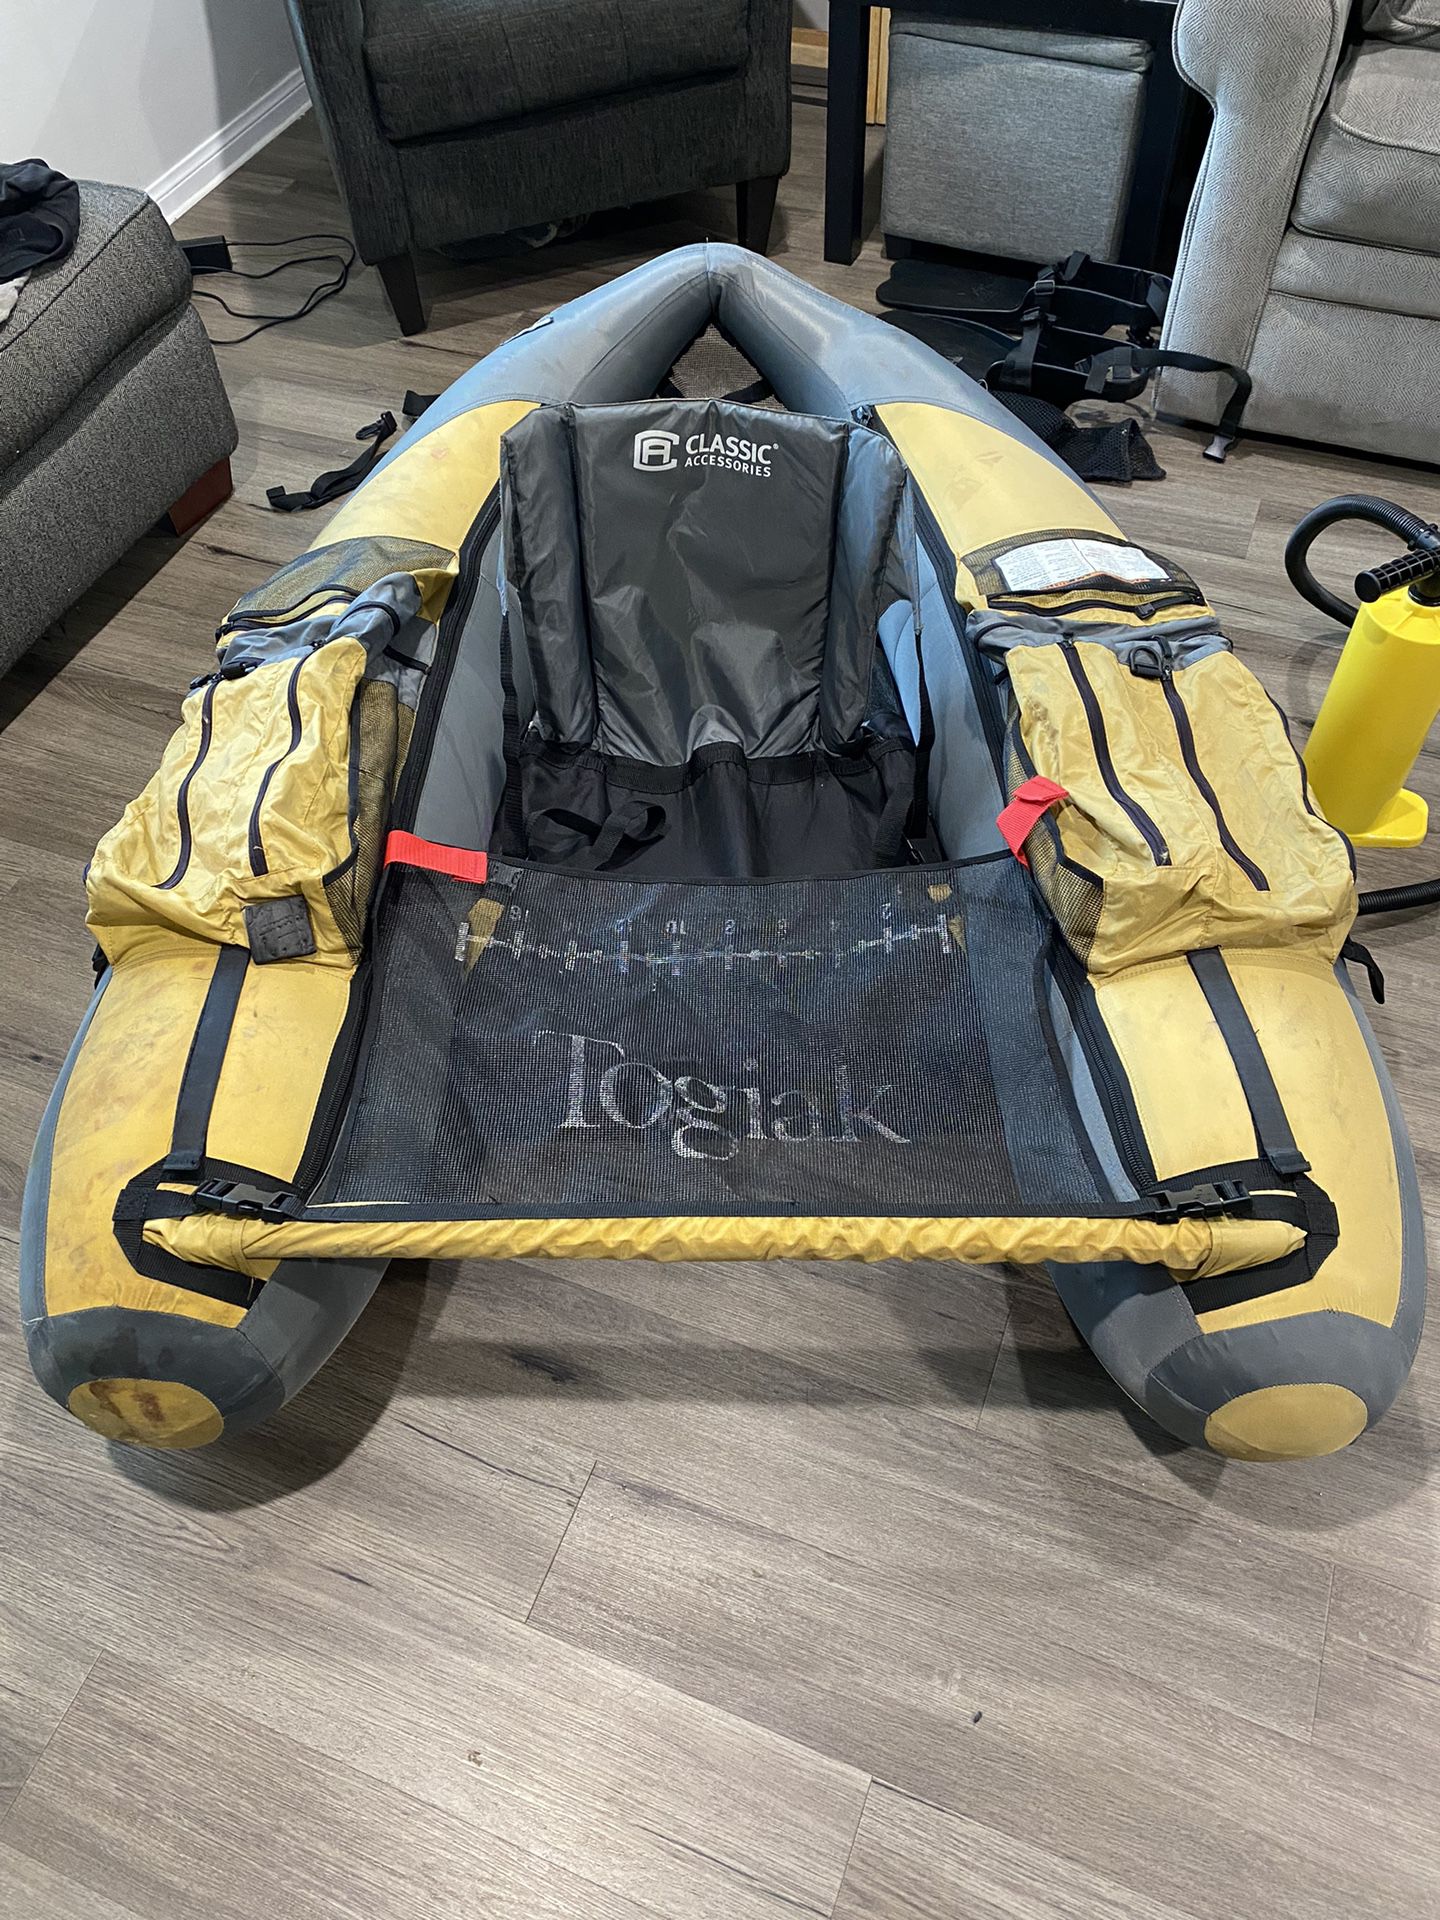 Classic Accessories Togiak Float Tube with Pump for Sale in Santa Ana, CA -  OfferUp